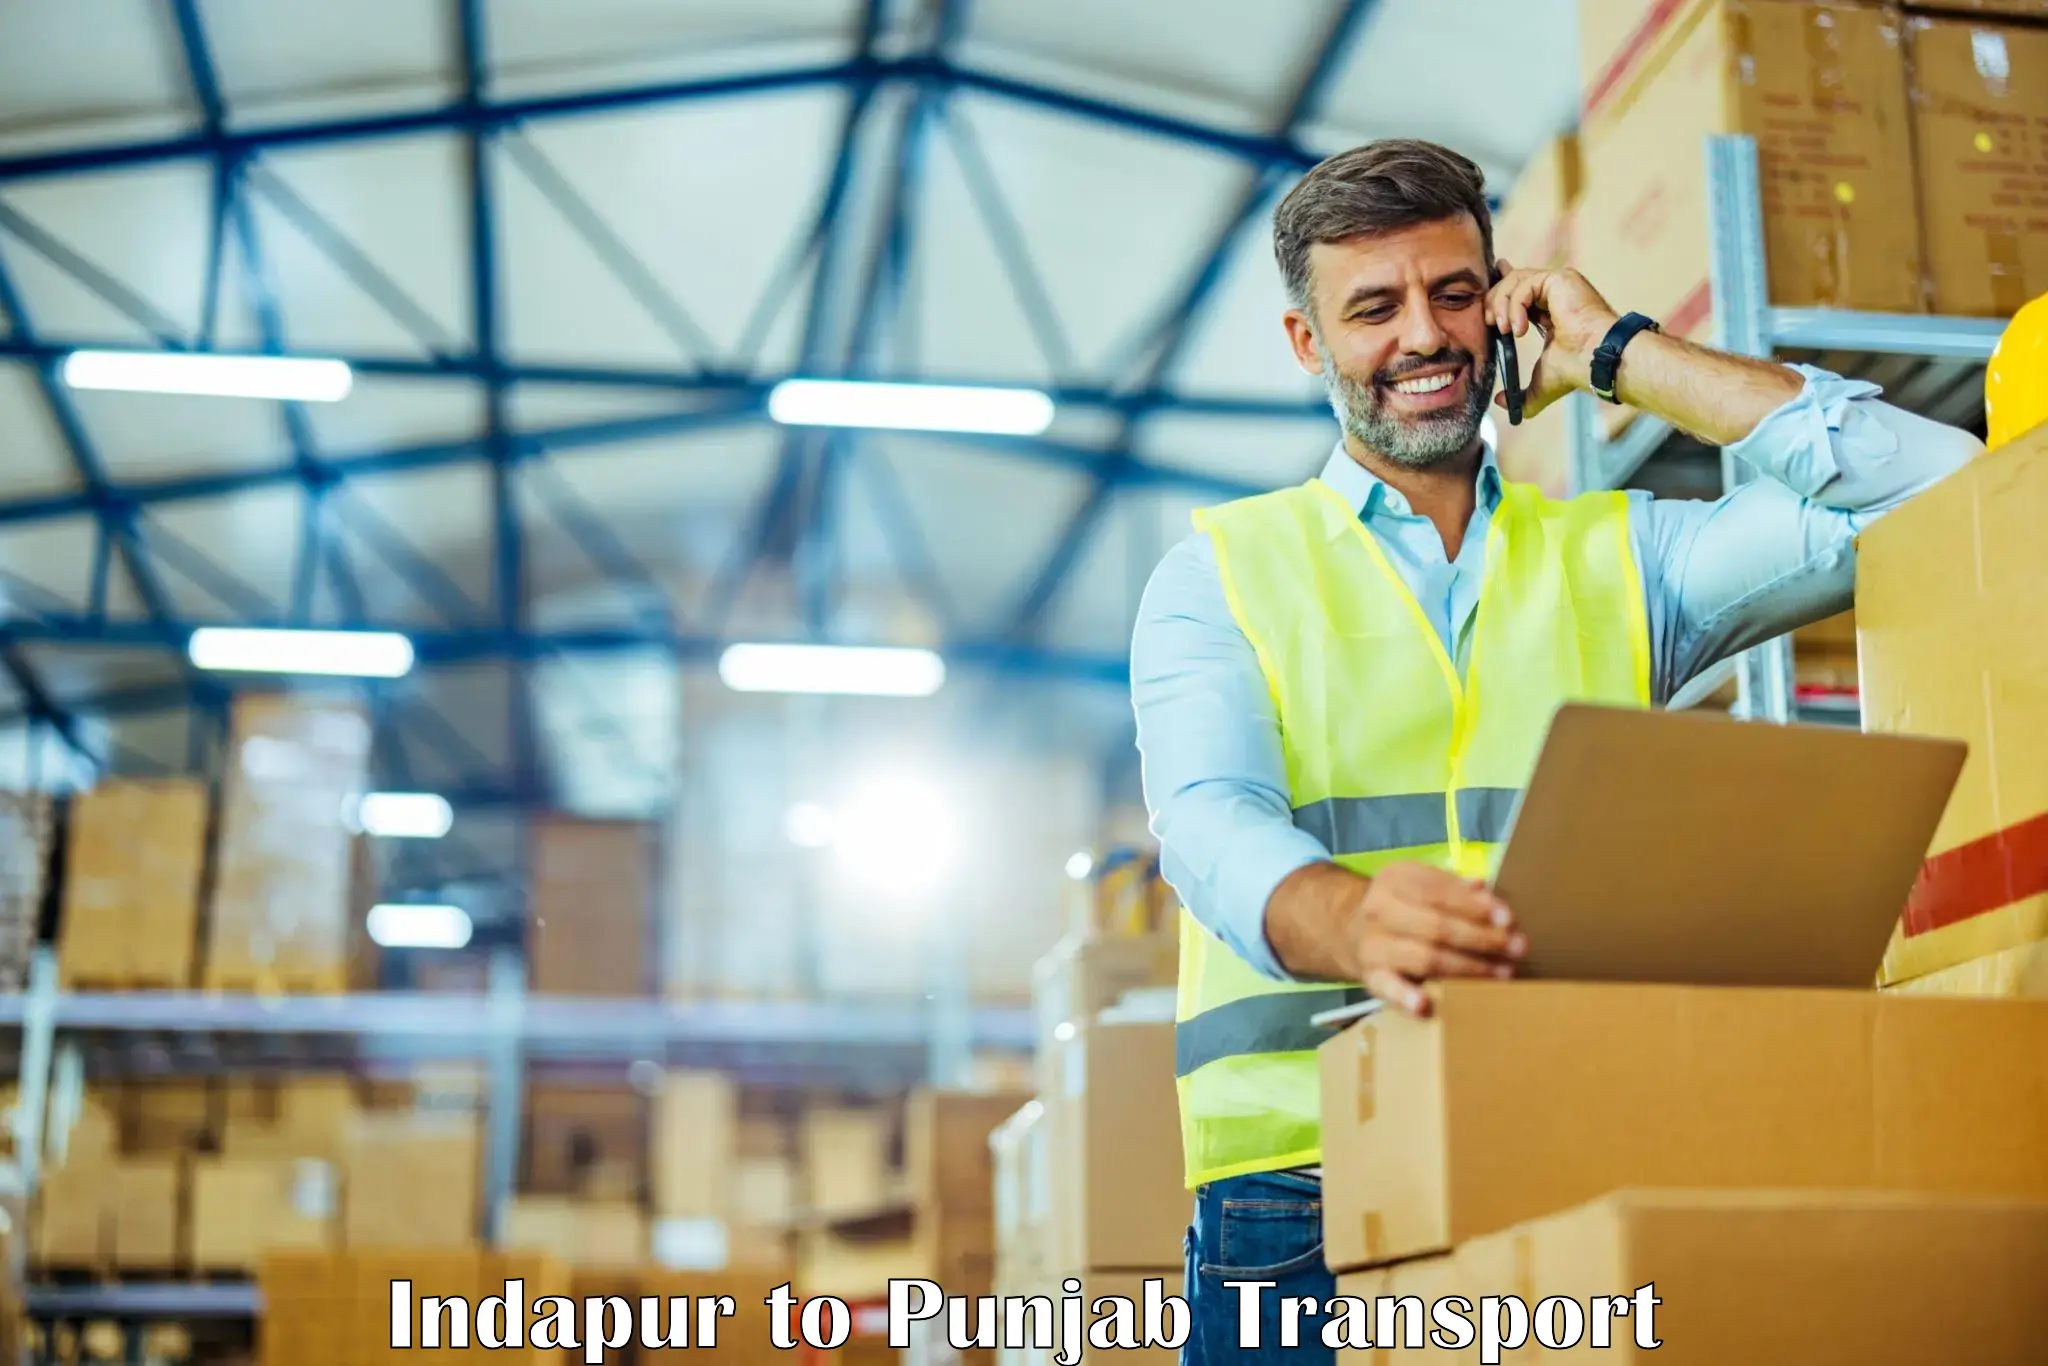 Daily parcel service transport Indapur to Zirakpur